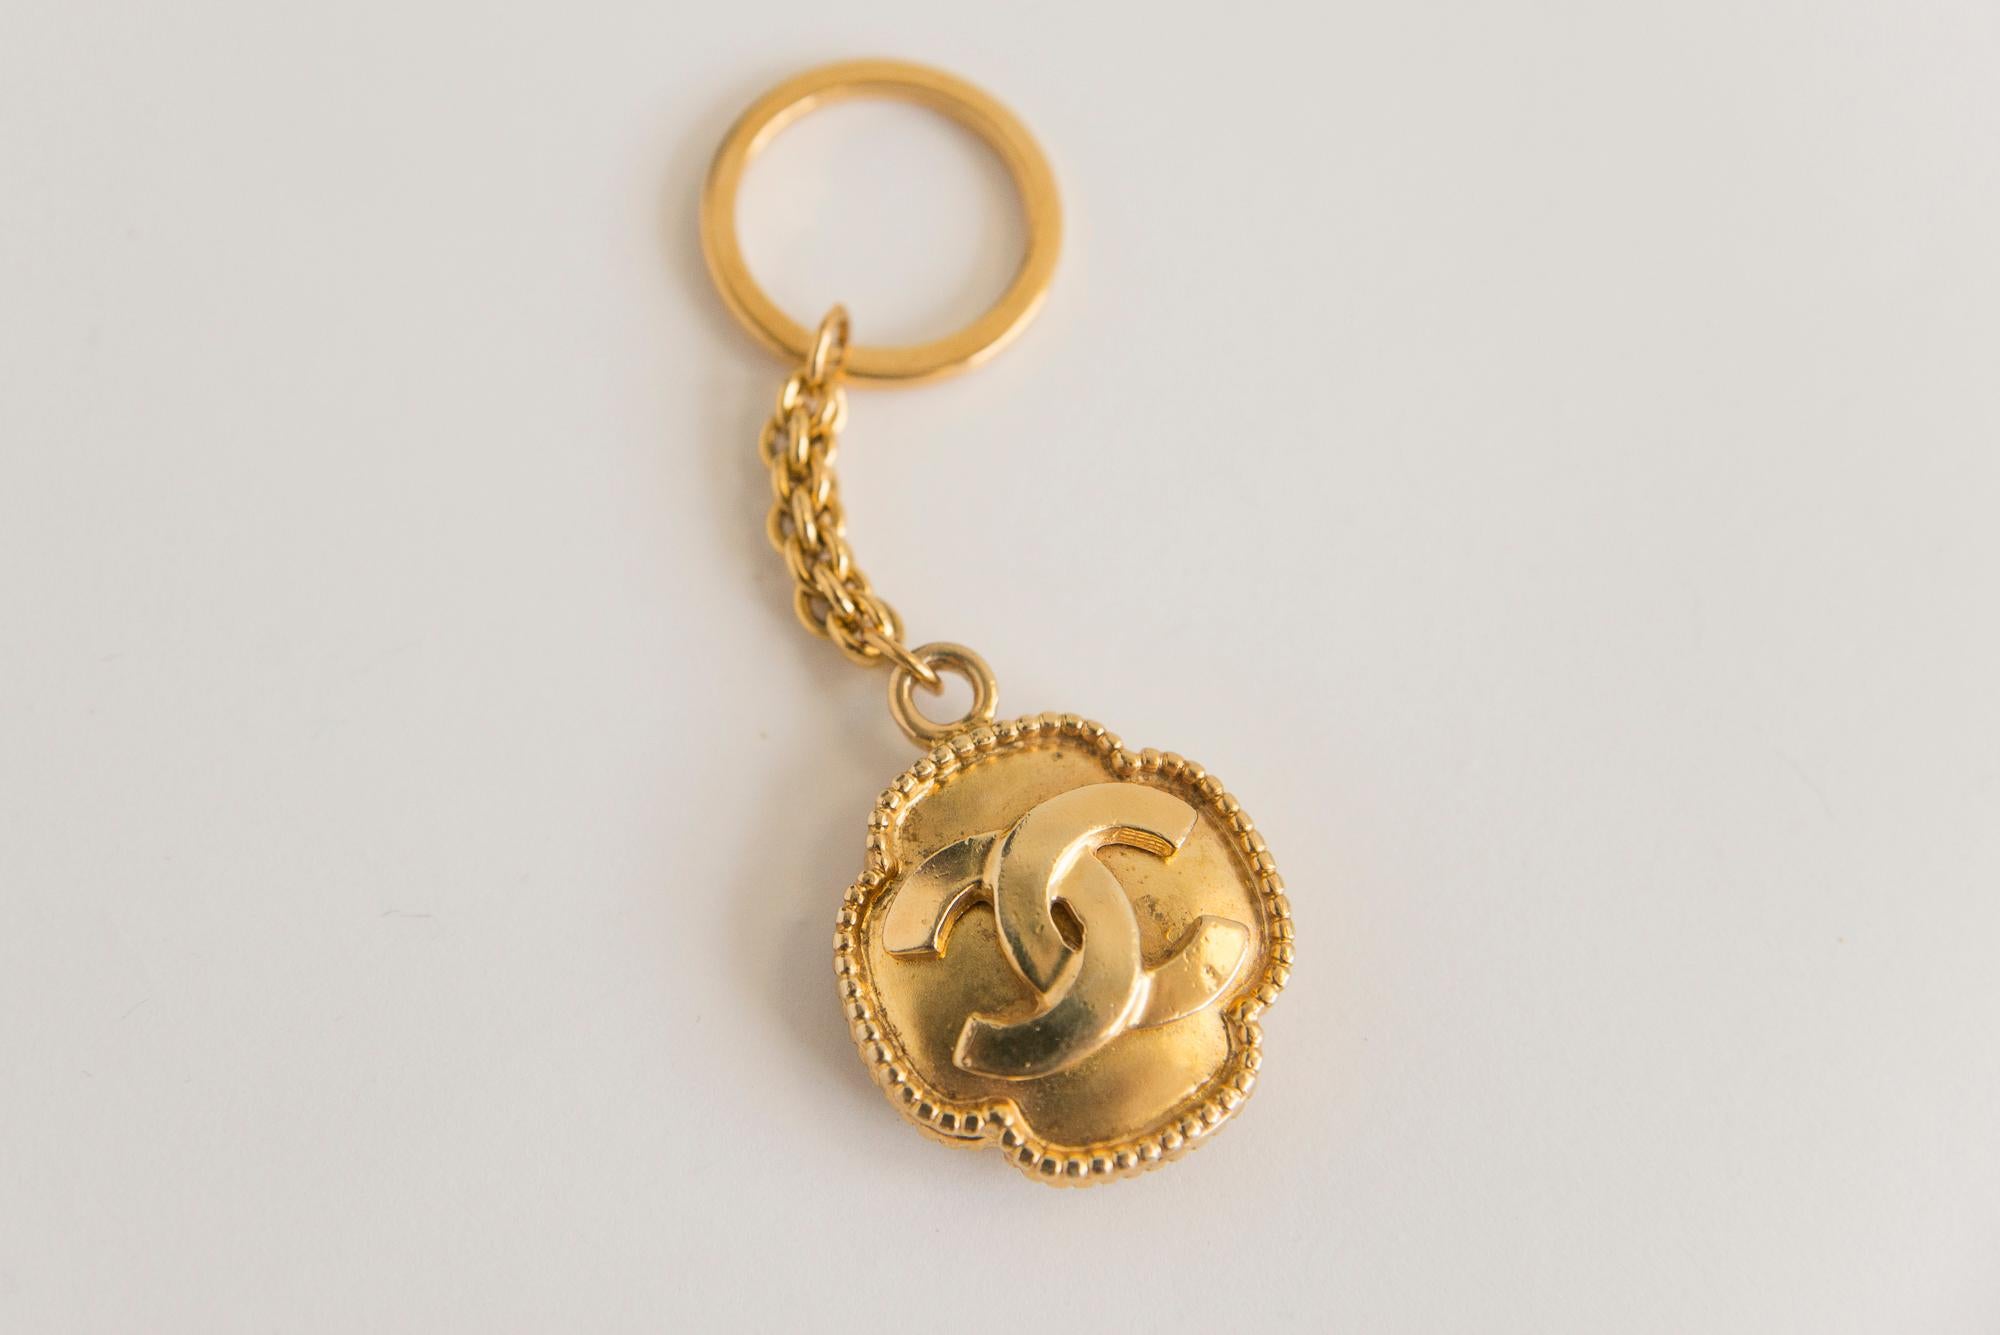 From the iconic Chanel Karl Lagerfeld years, this late 80s - early 90s refined gold-tone metal CC keychain will make a perfect little gift for fans of the House. Of course, wearable as well as a bag charm ! Signed on plaque.

Dimensions :
Full